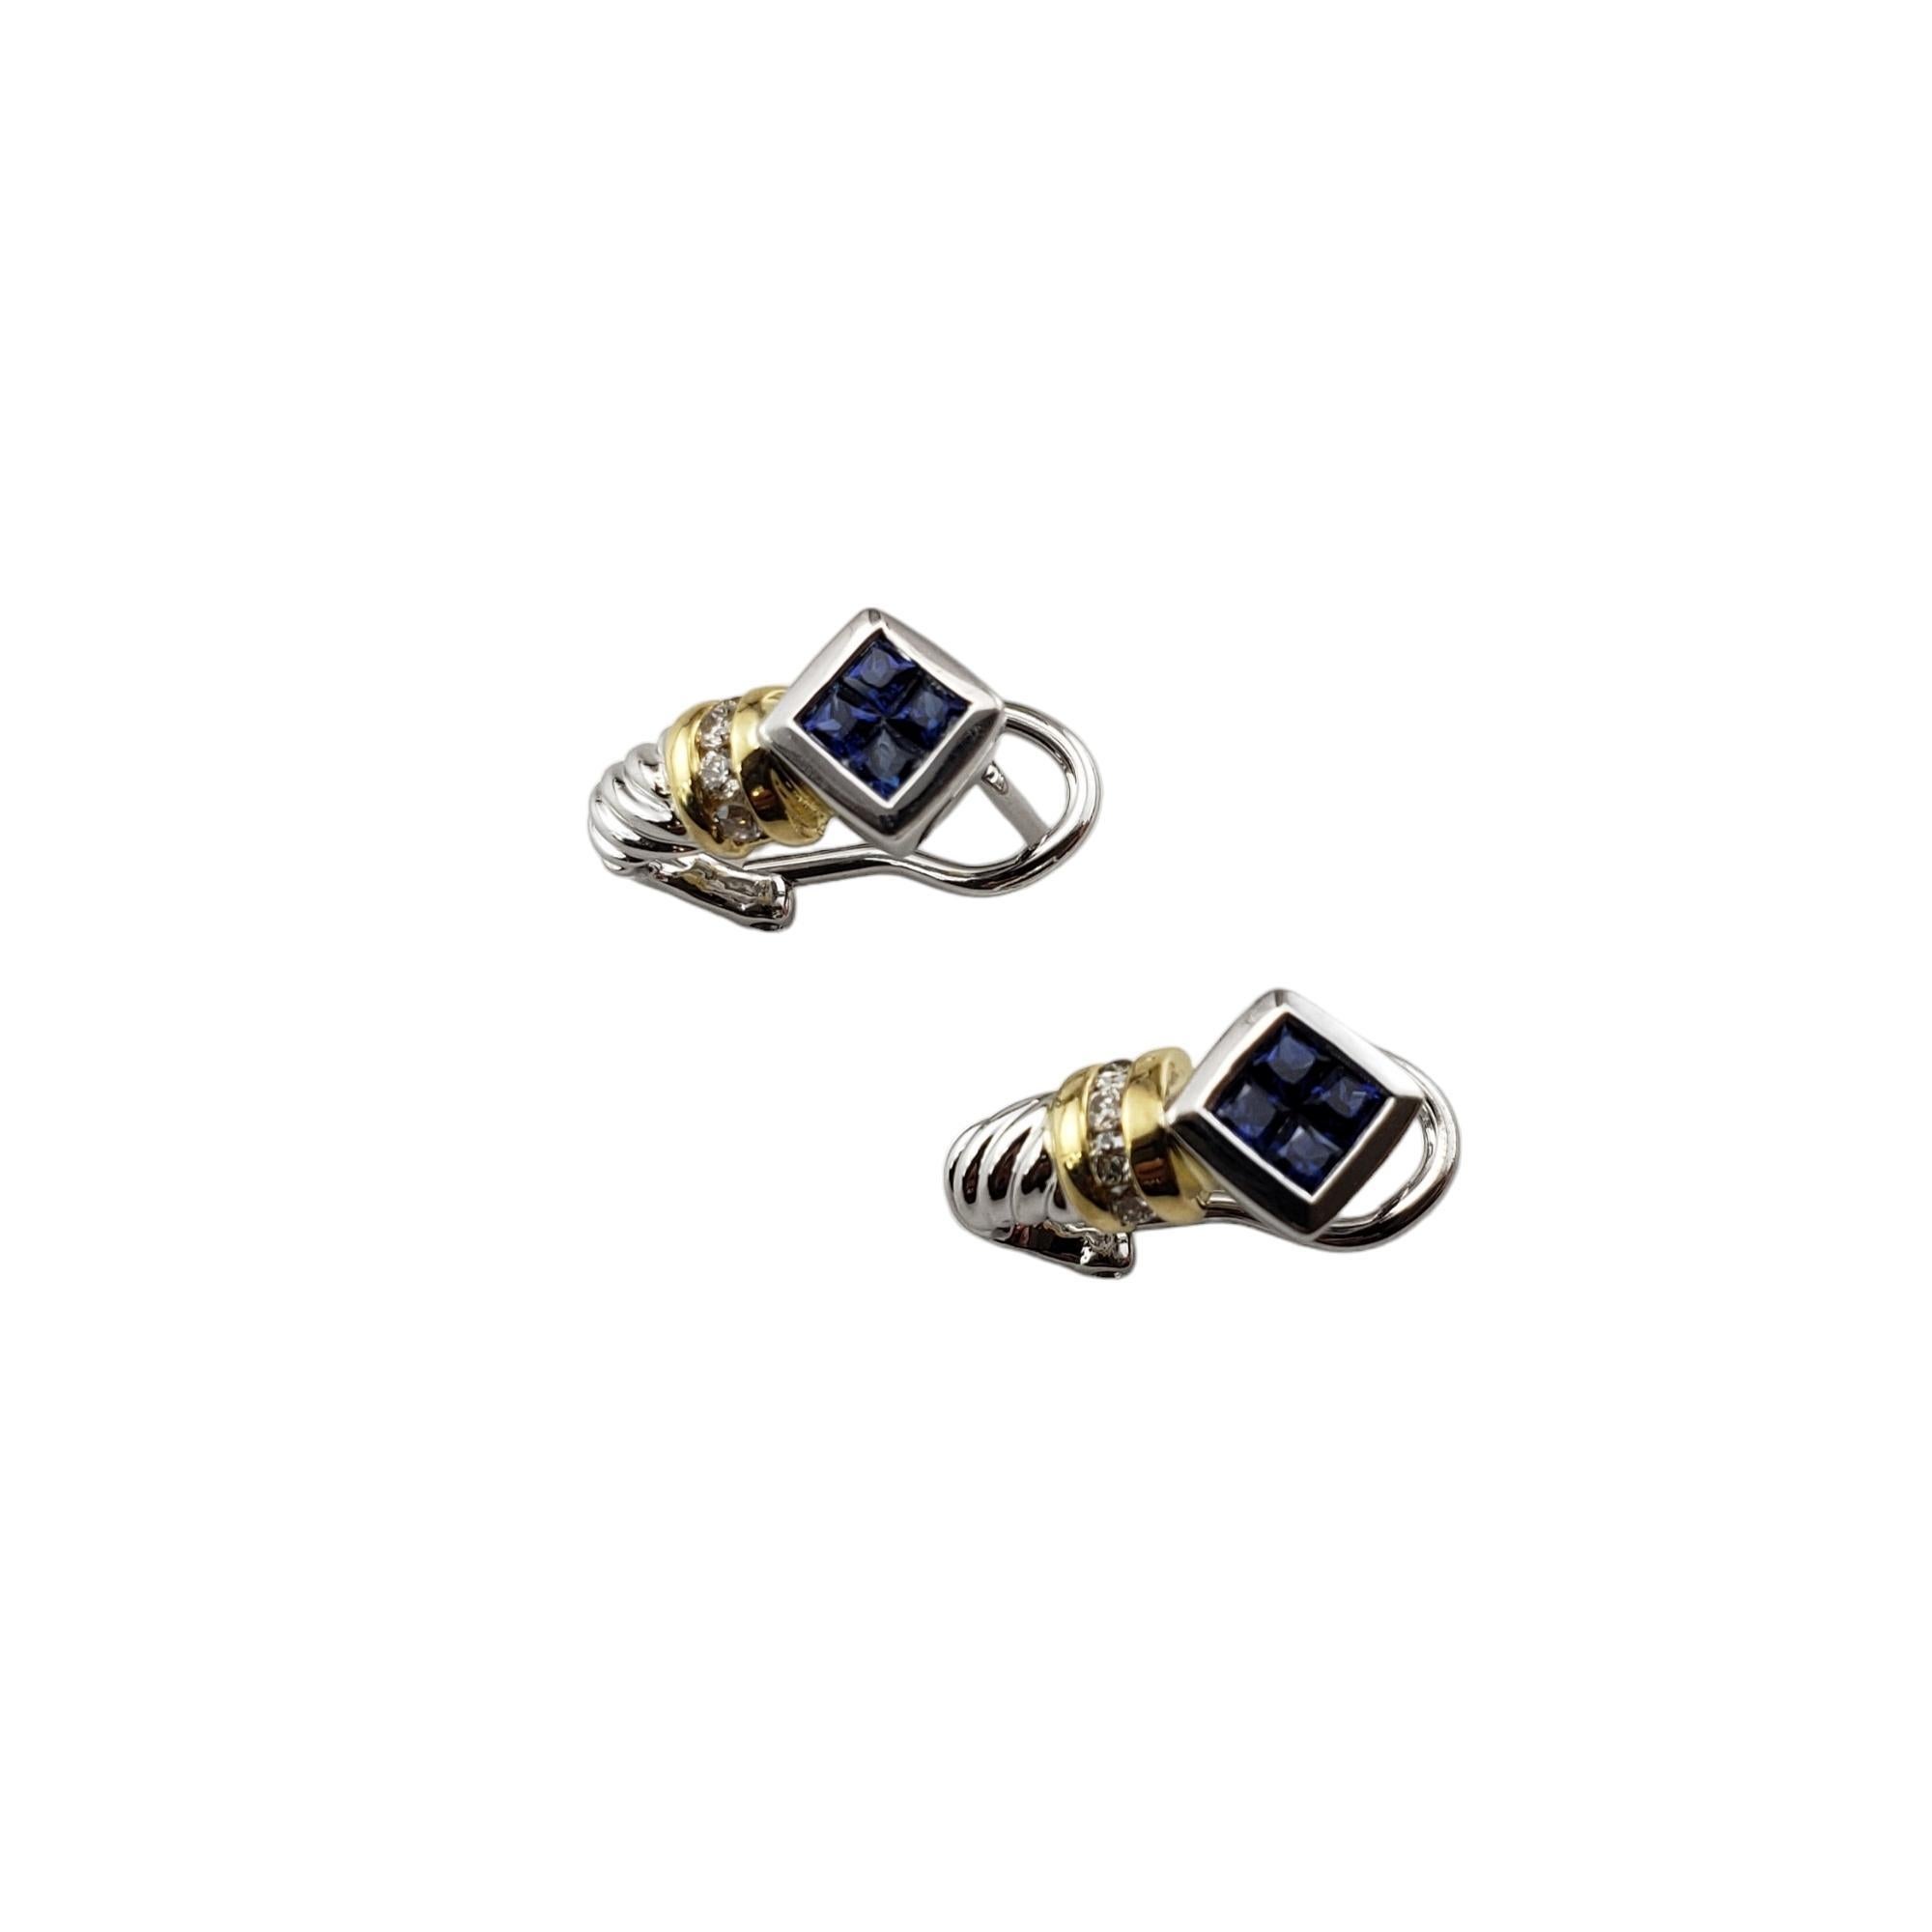 Vintage 18K White and Yellow Gold Sapphire and Diamond Earrings JAGi Certified-

These elegant earrings each features four square cut sapphires and four round brilliant cut diamonds set in 18K yellow and white gold.  Omega back closures.

Total